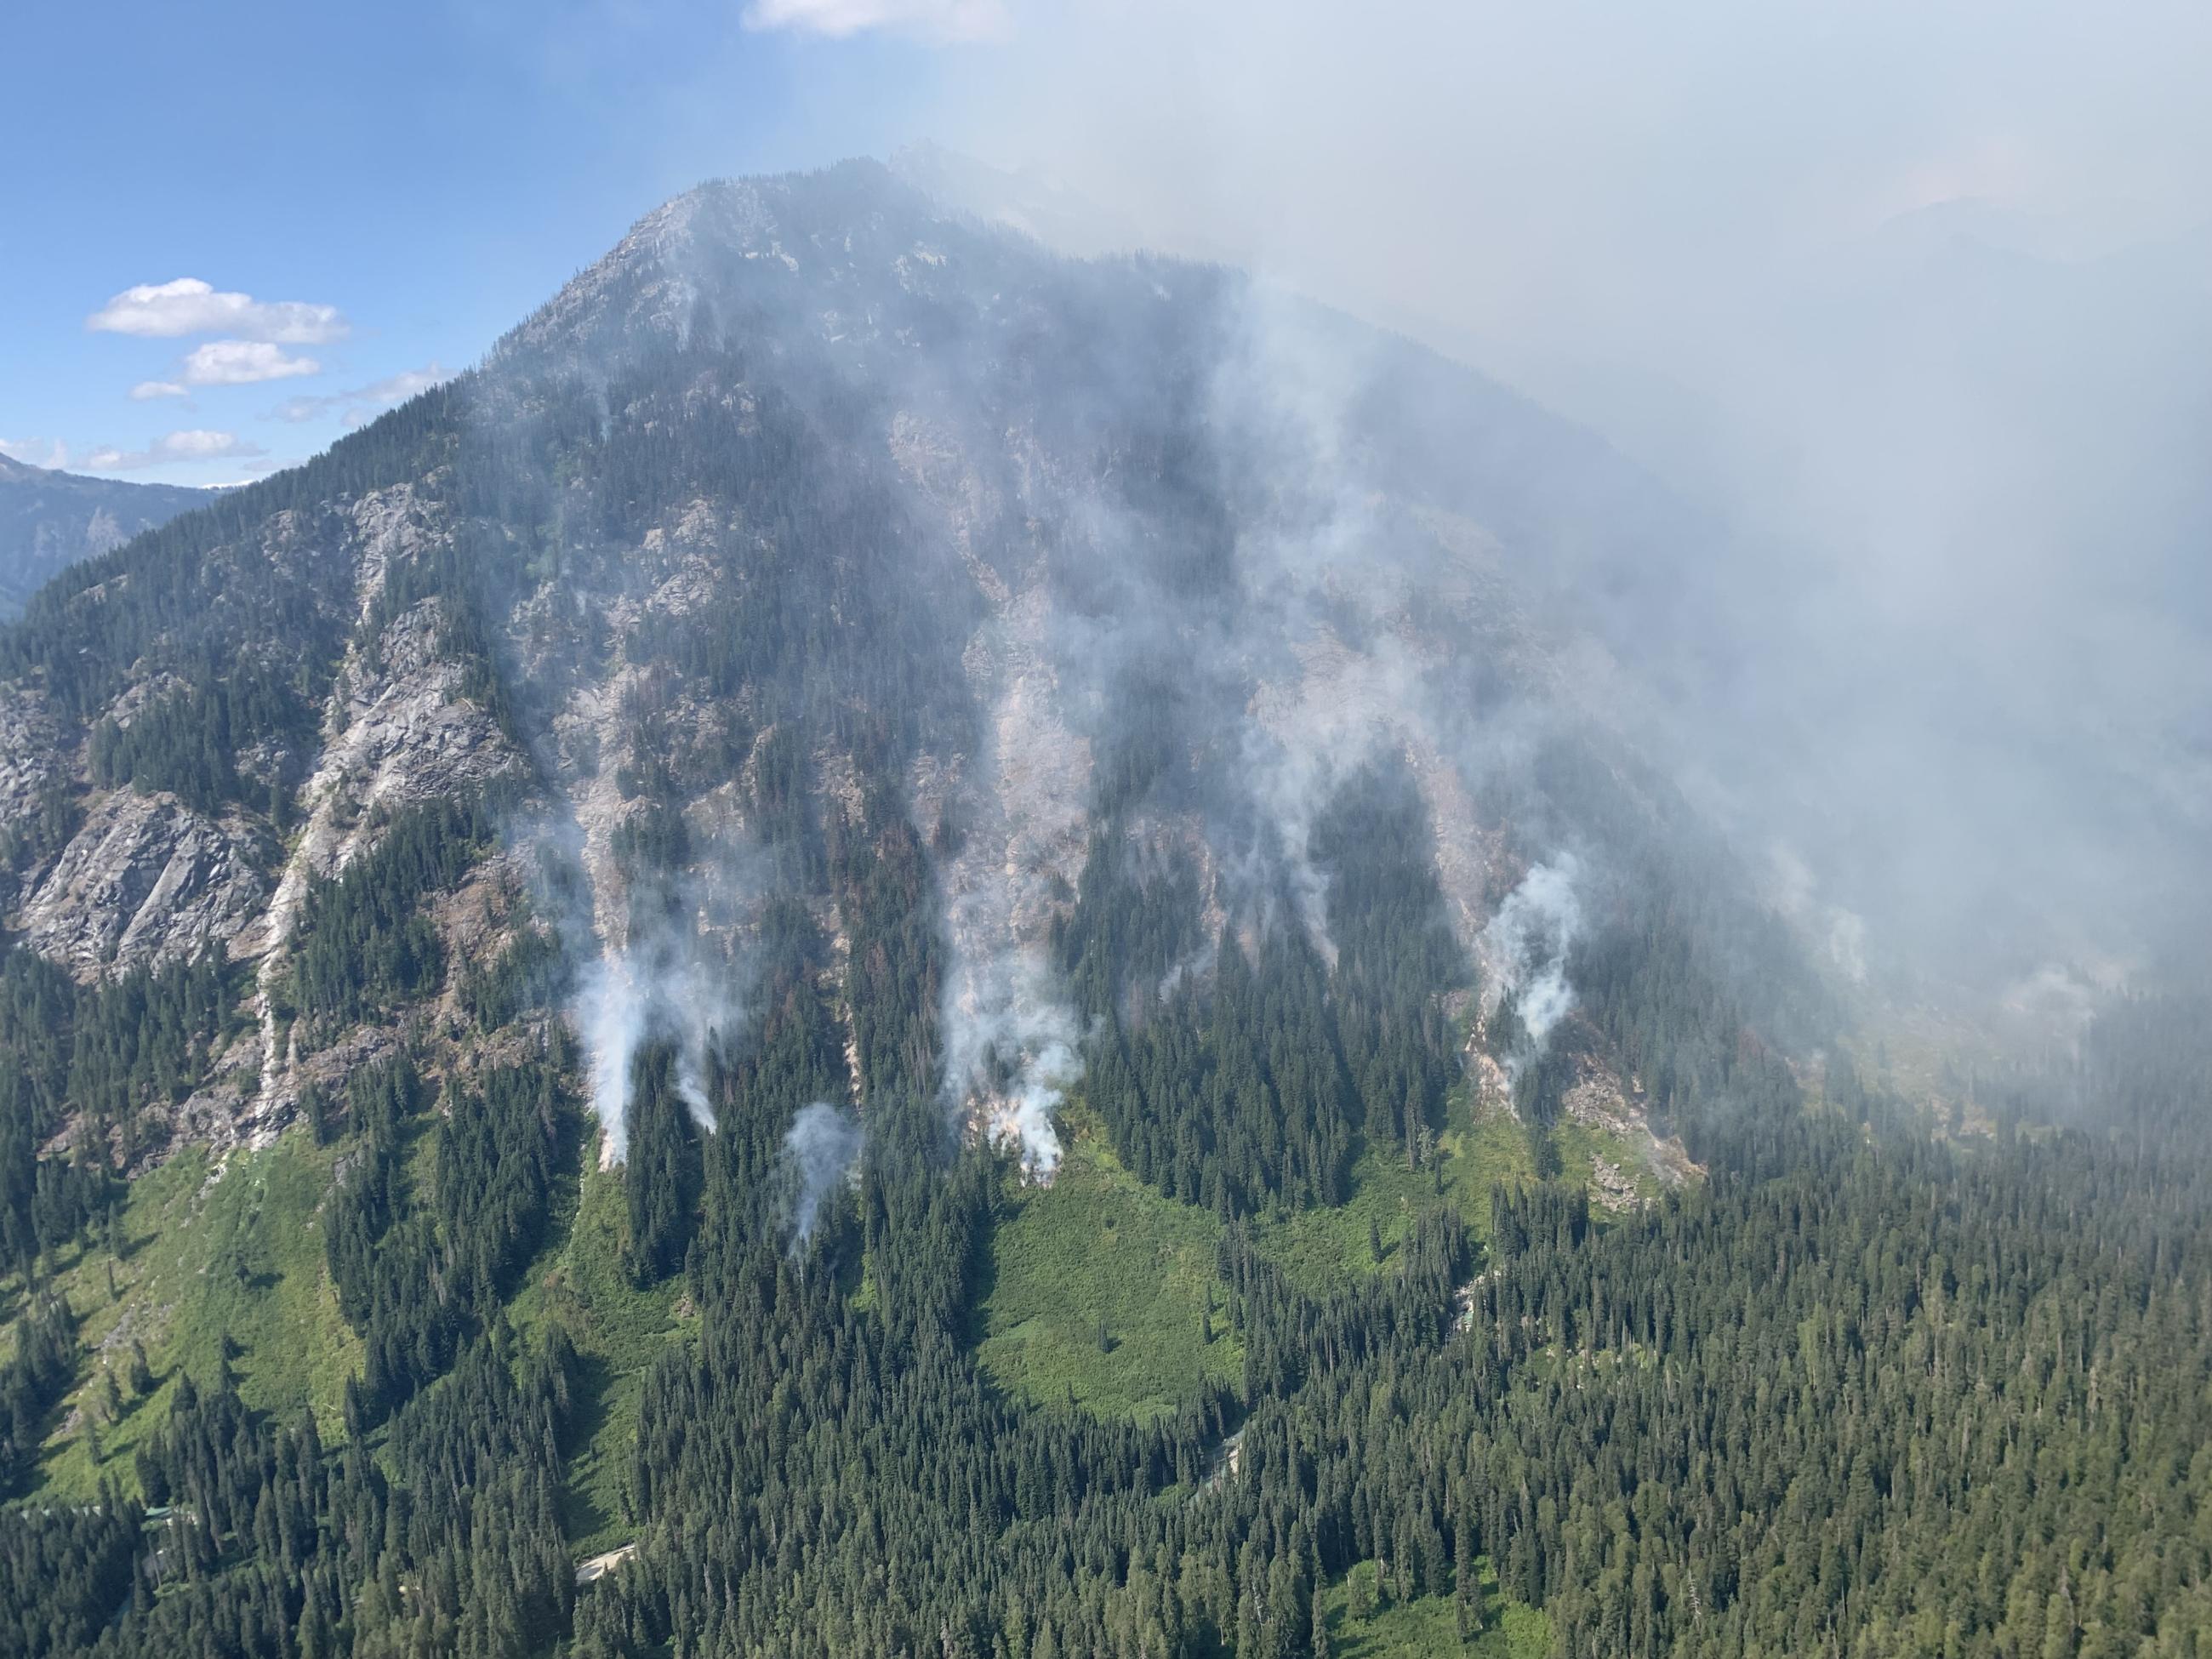 Tendrils of white smoke are visible in three avalanche chutes on a hillside in the Glacier Peak Wilderness Area where the Airplane Lake Fire is burning.